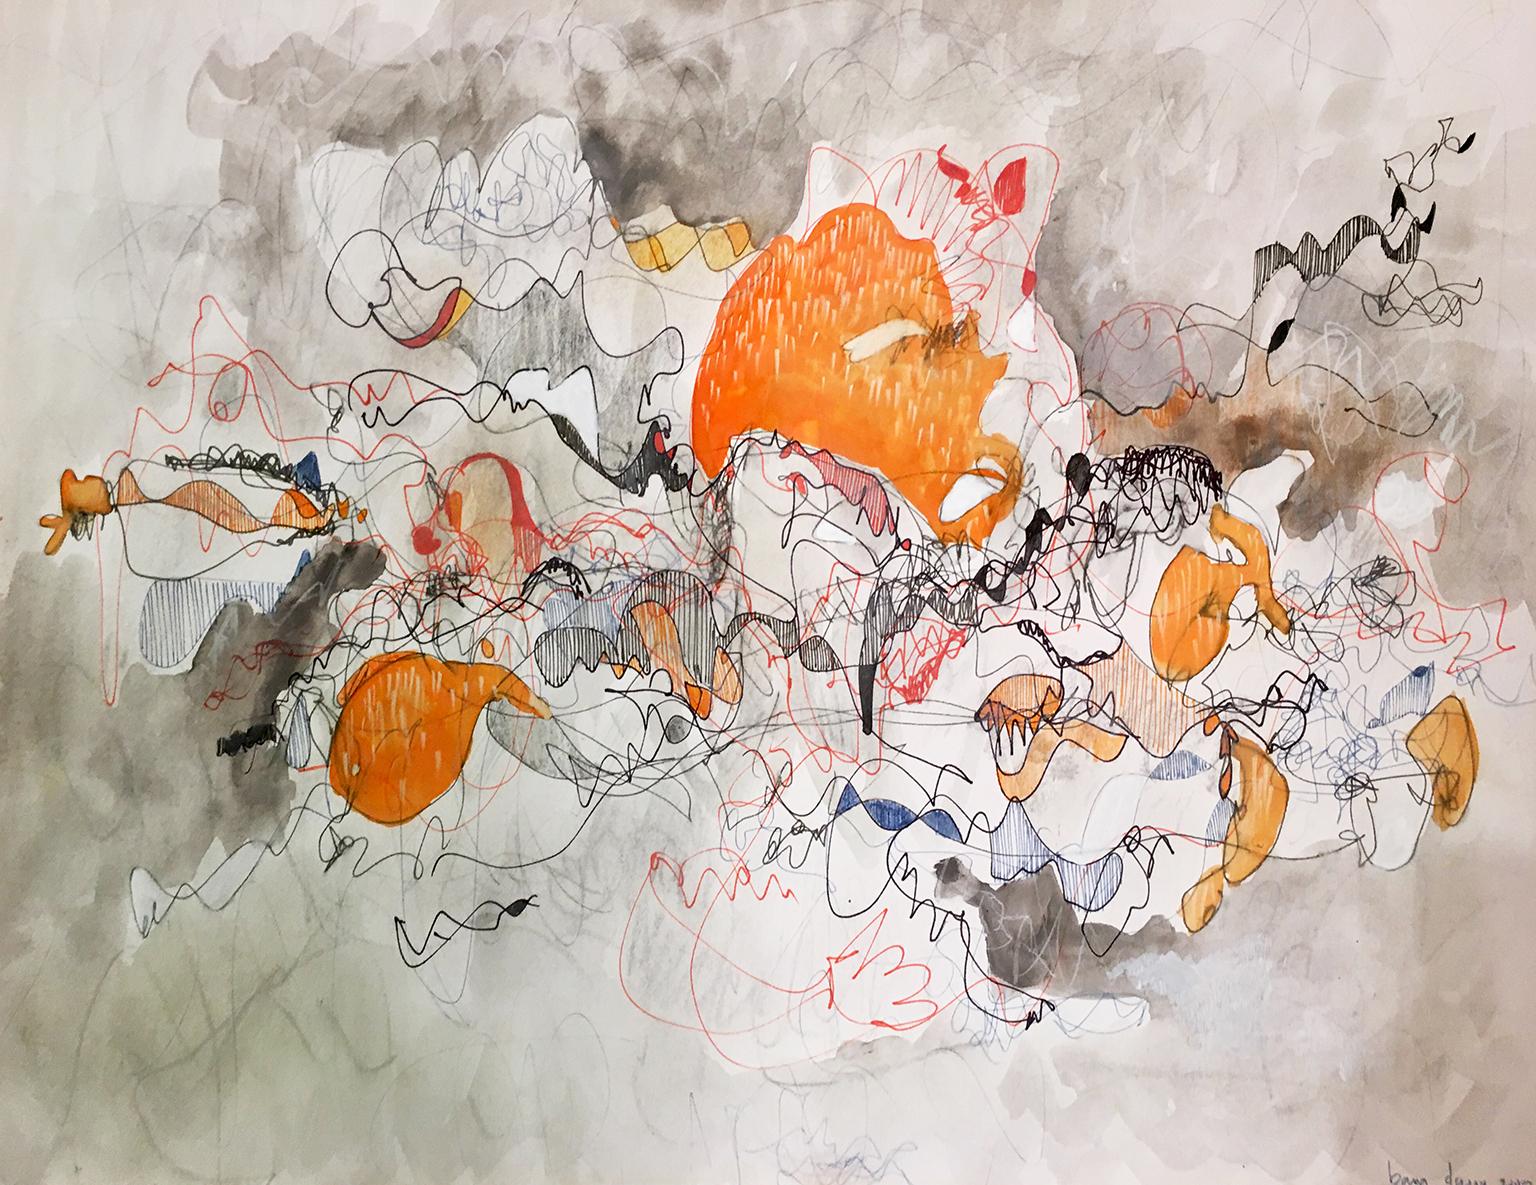 Orange Tainted 01 by Bang Dang
11 x 14 in 
Watercolor, graphite, ink, charcoal, color pencil and gesso on paper

Bang Dang's work is a form of meditation apart from his work as an architect. It features intricate line work offset by vibrant bursts